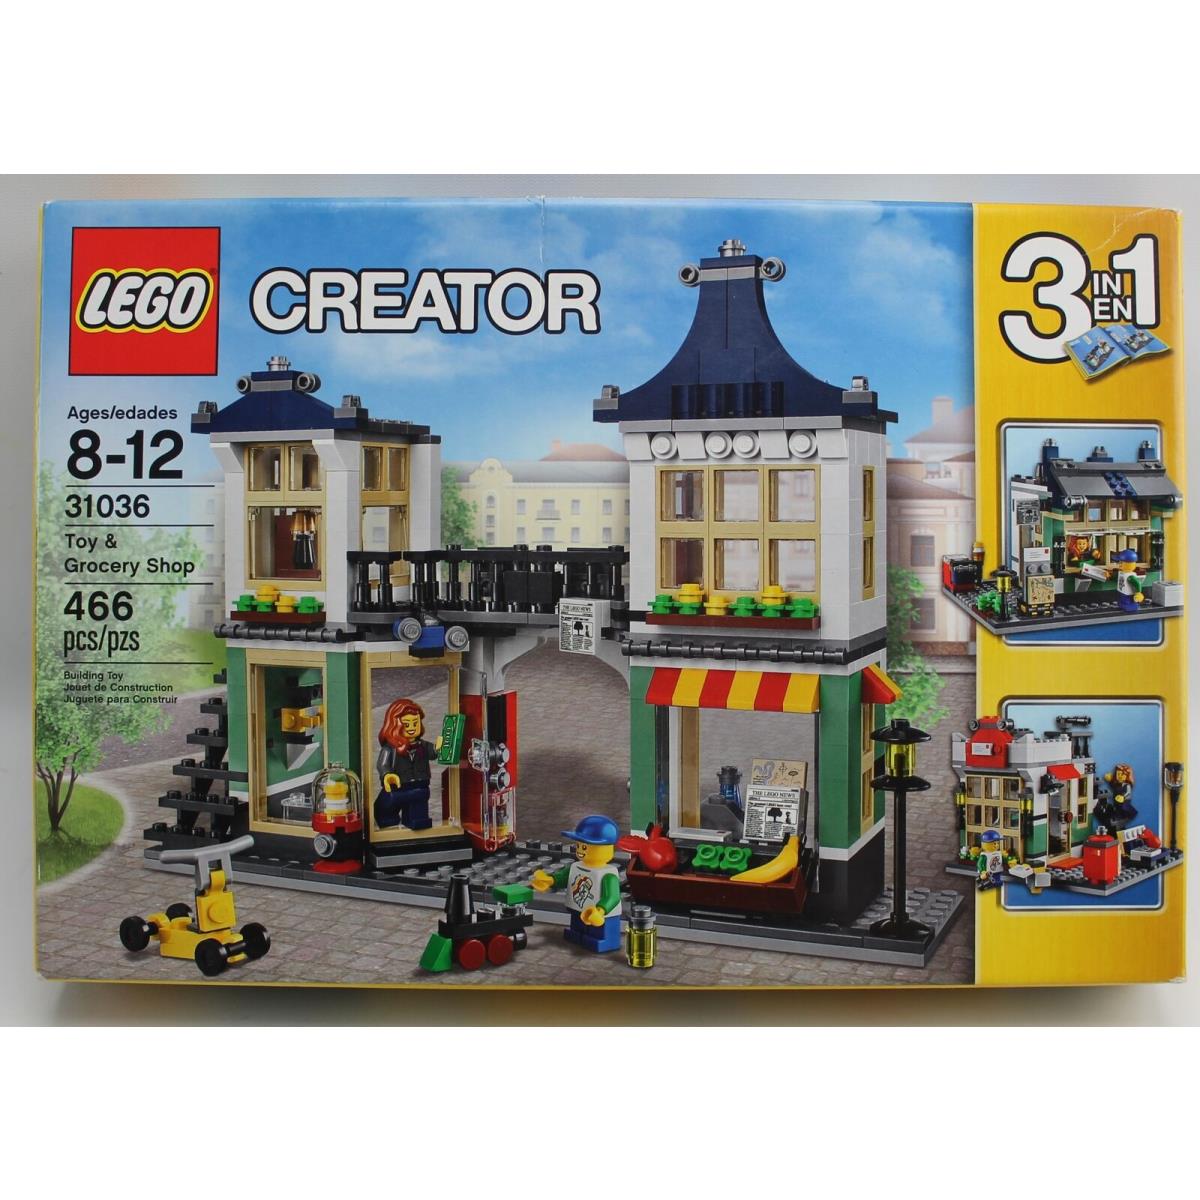 Lego Toy Grocery Shop 31036 Set 3 in 1 Creator Set